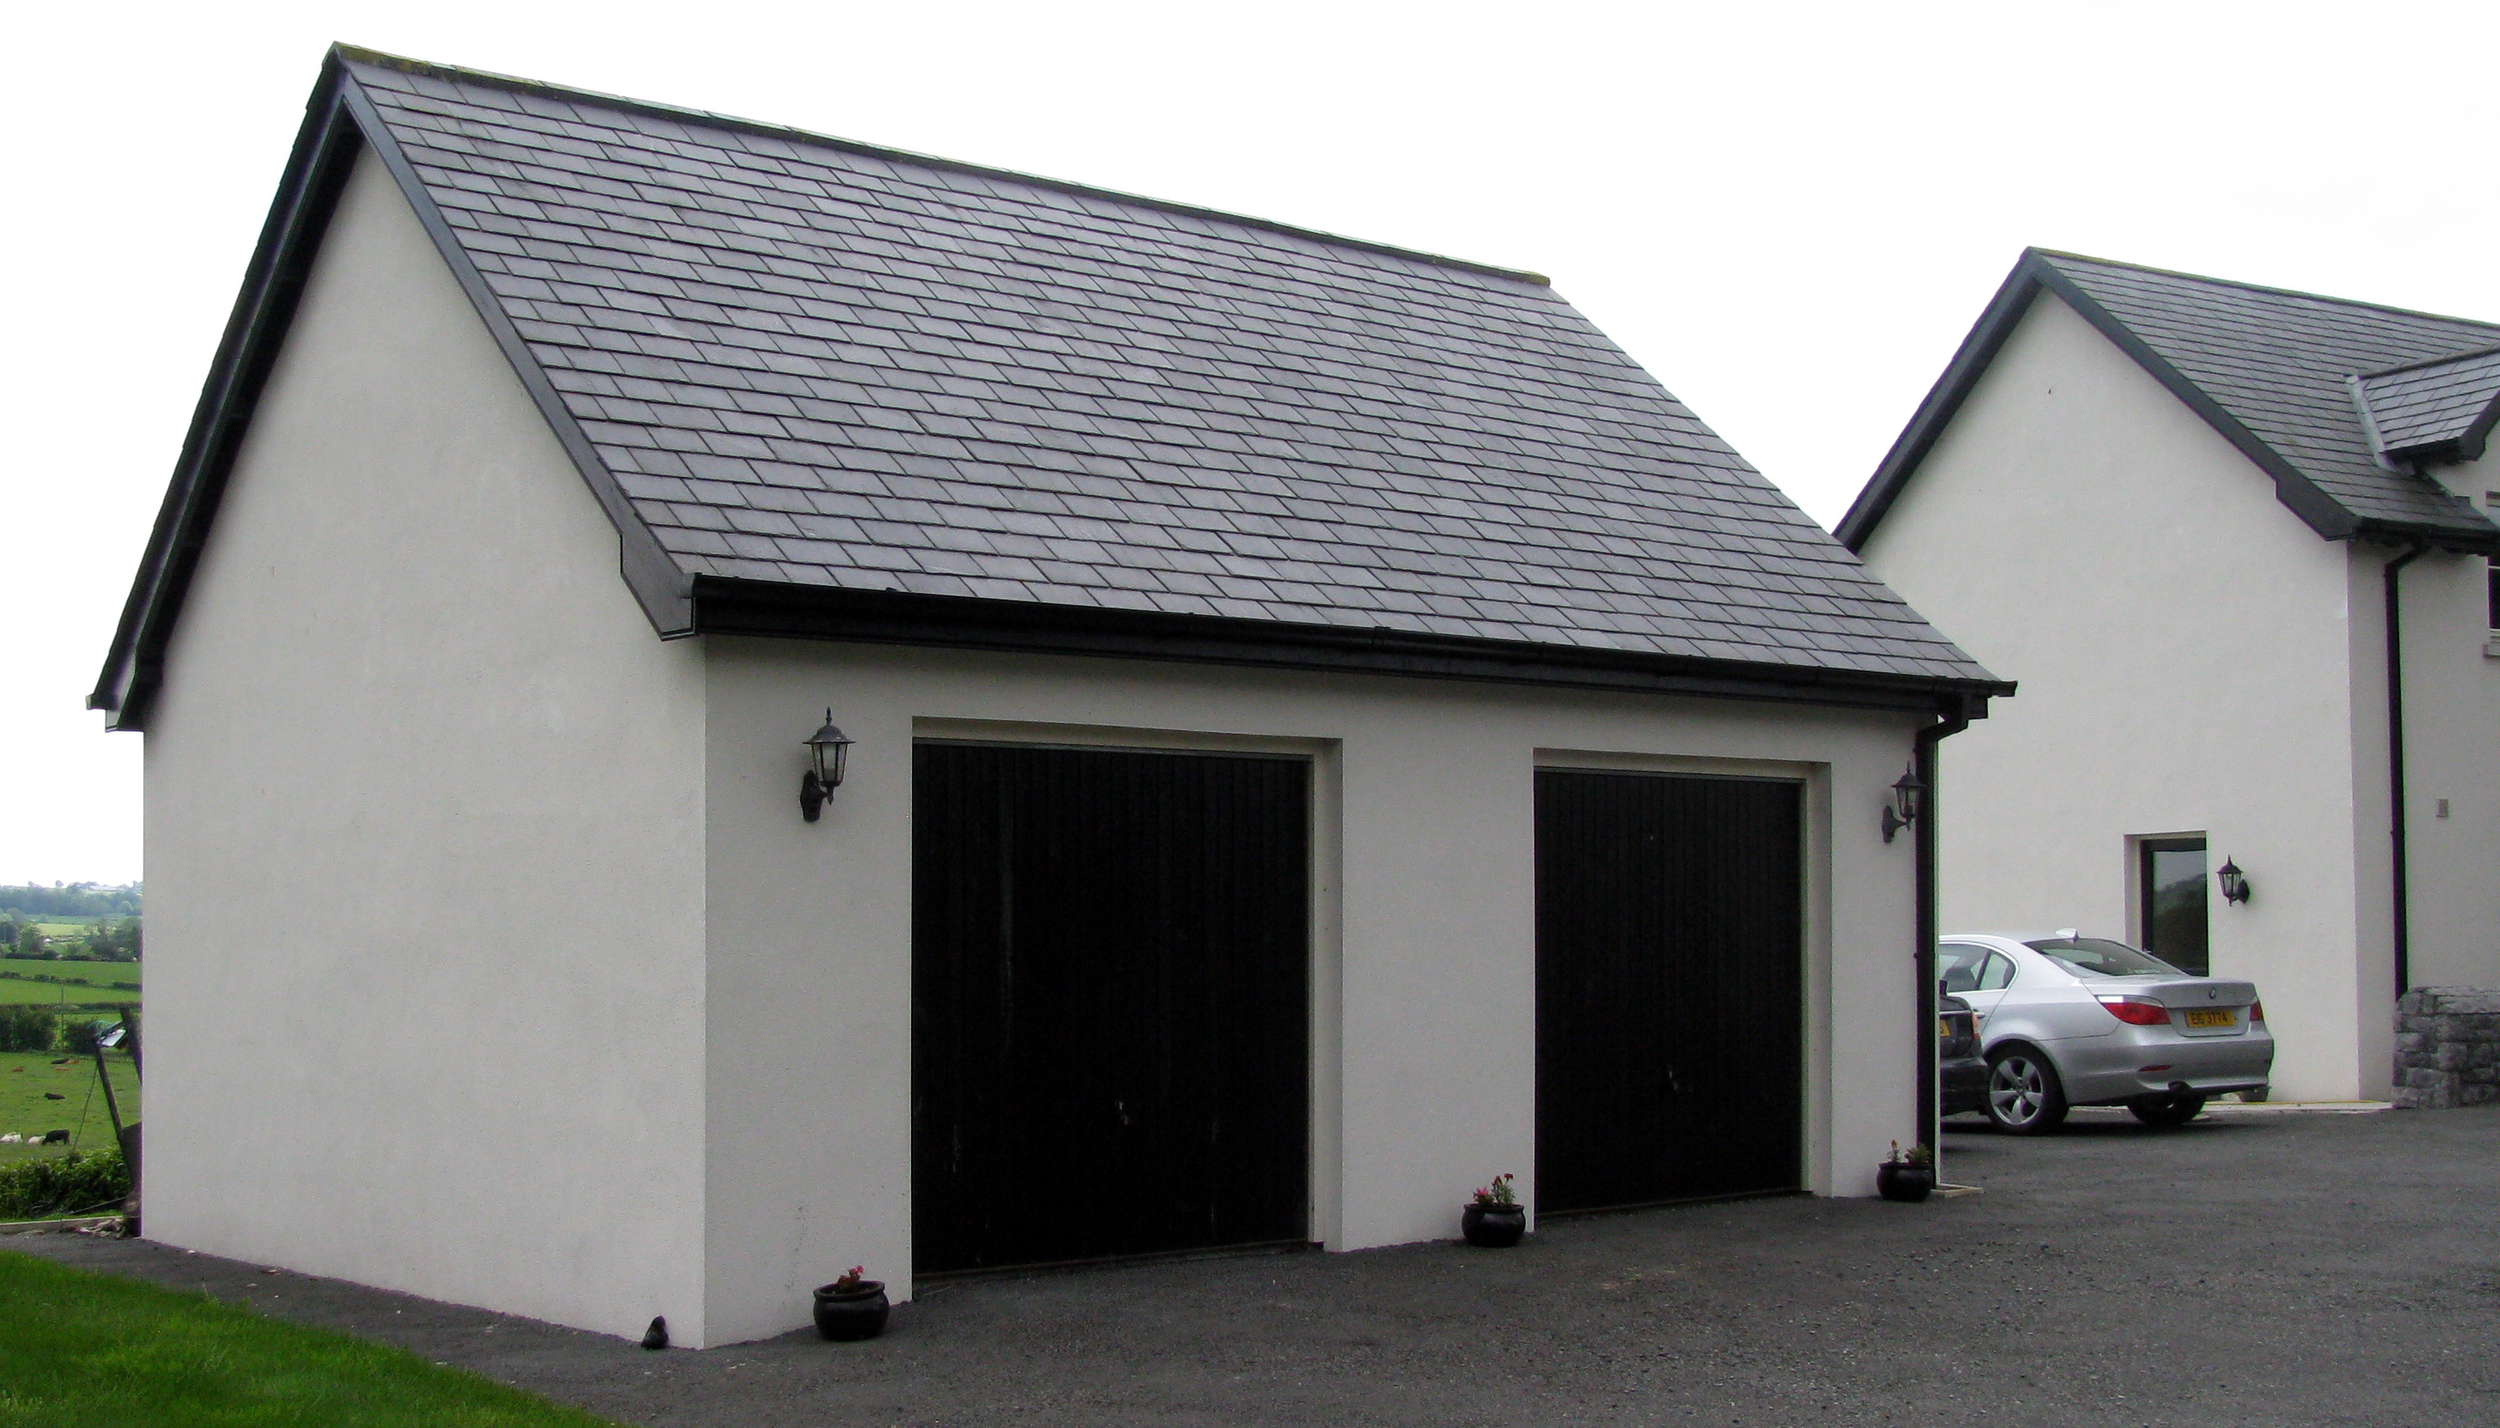   The garage with a Pattini roof in the image above, sits next to a farm house in Northern Ireland overlooking some lush, green pastures and lots of fat cattle!  